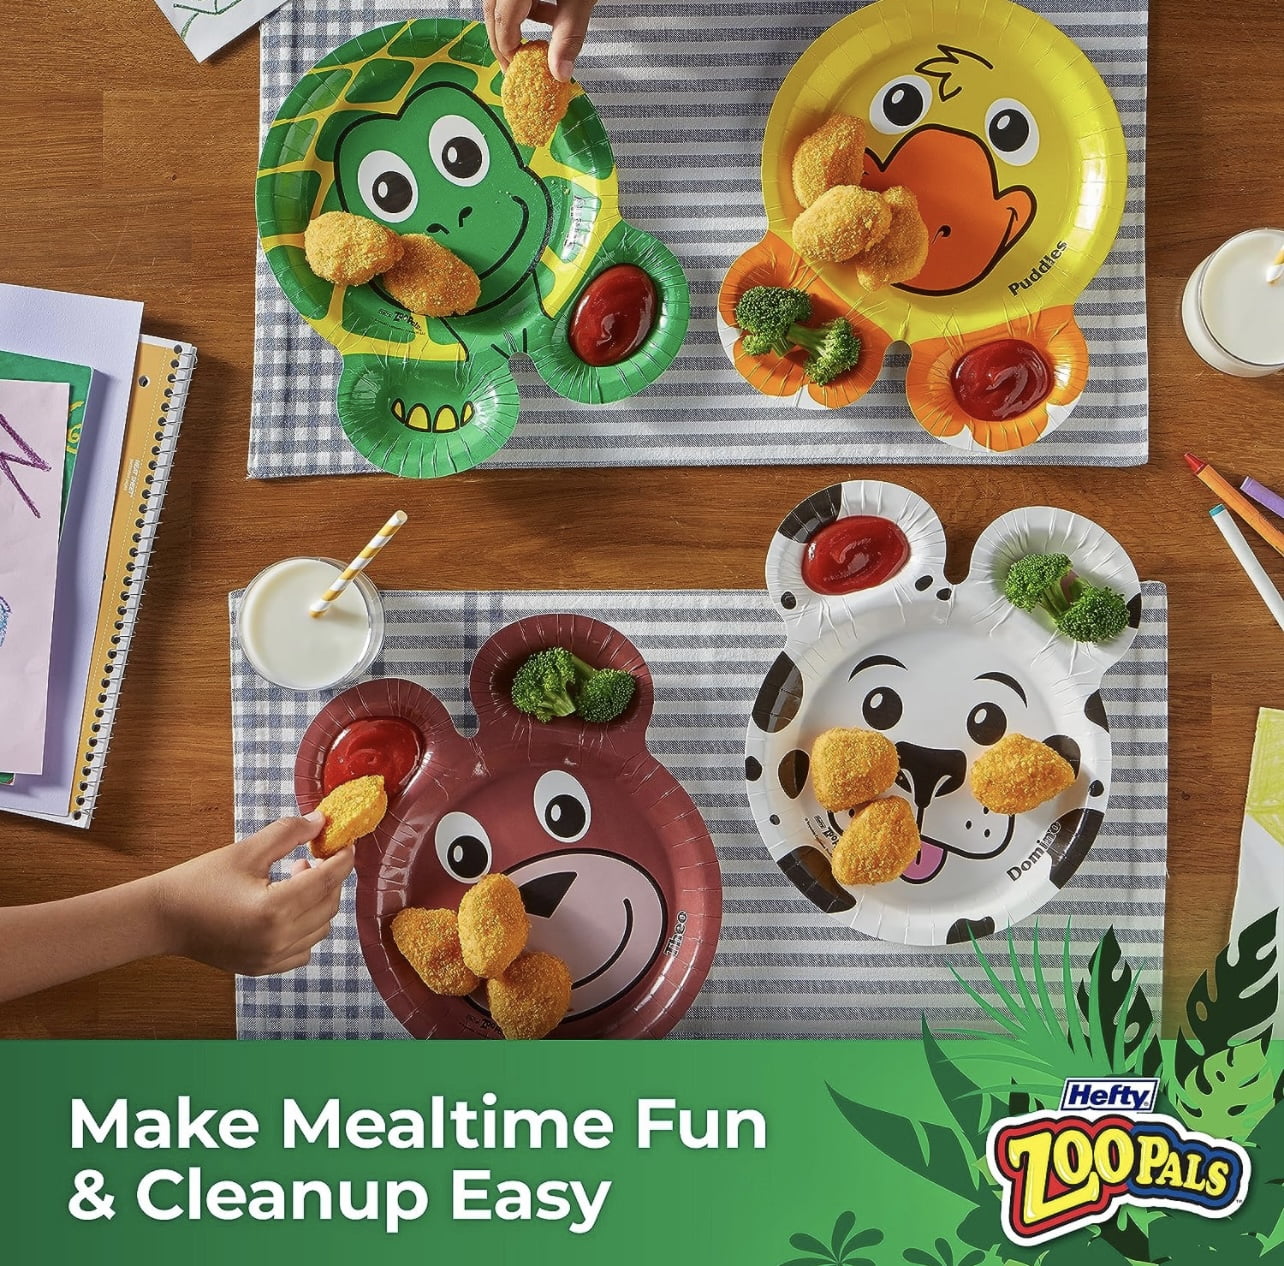 Hefty Zoo Pals Coupon ($1.44 at Target or Walmart) - My Frugal